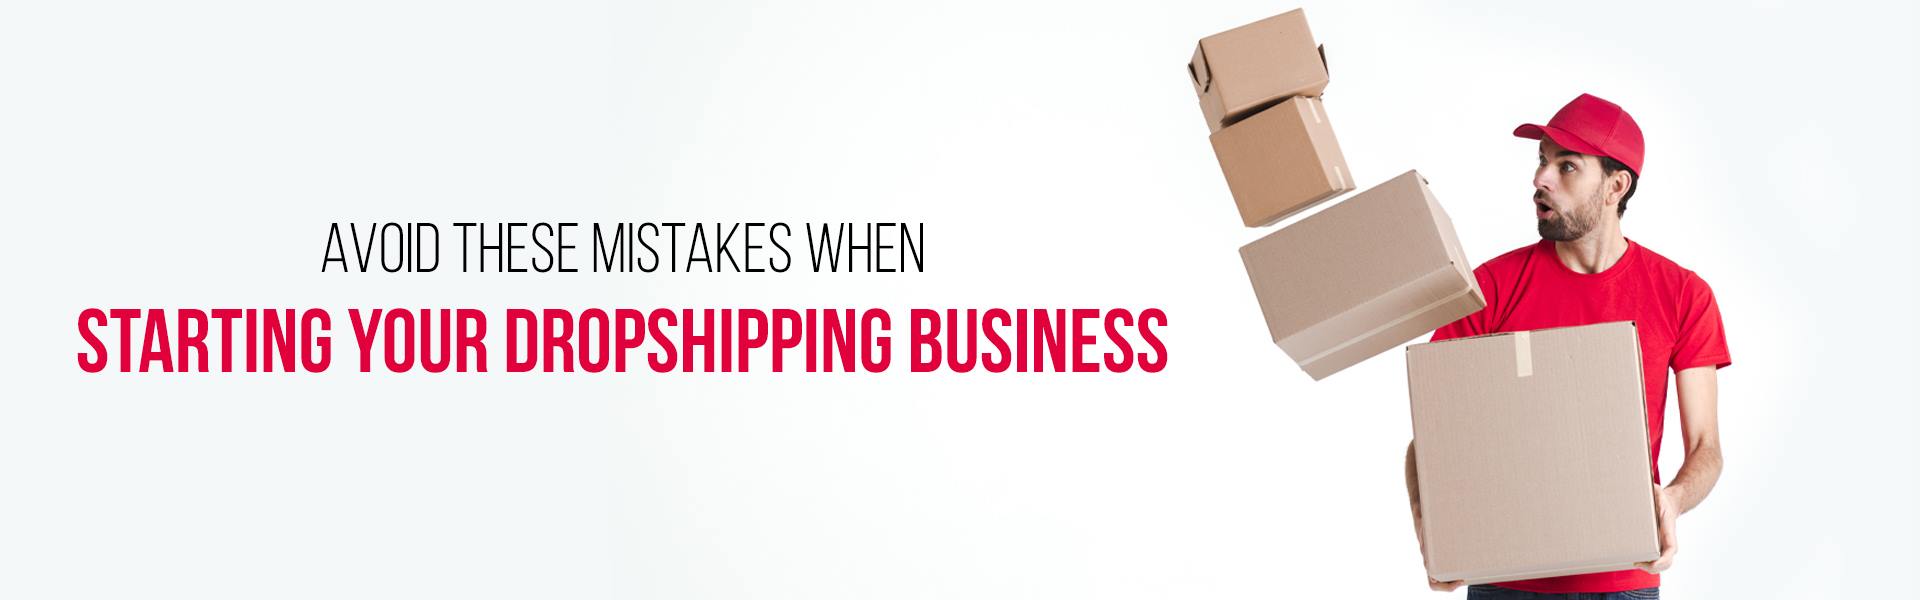 Avoid These Mistakes When Starting Your Dropshipping Business